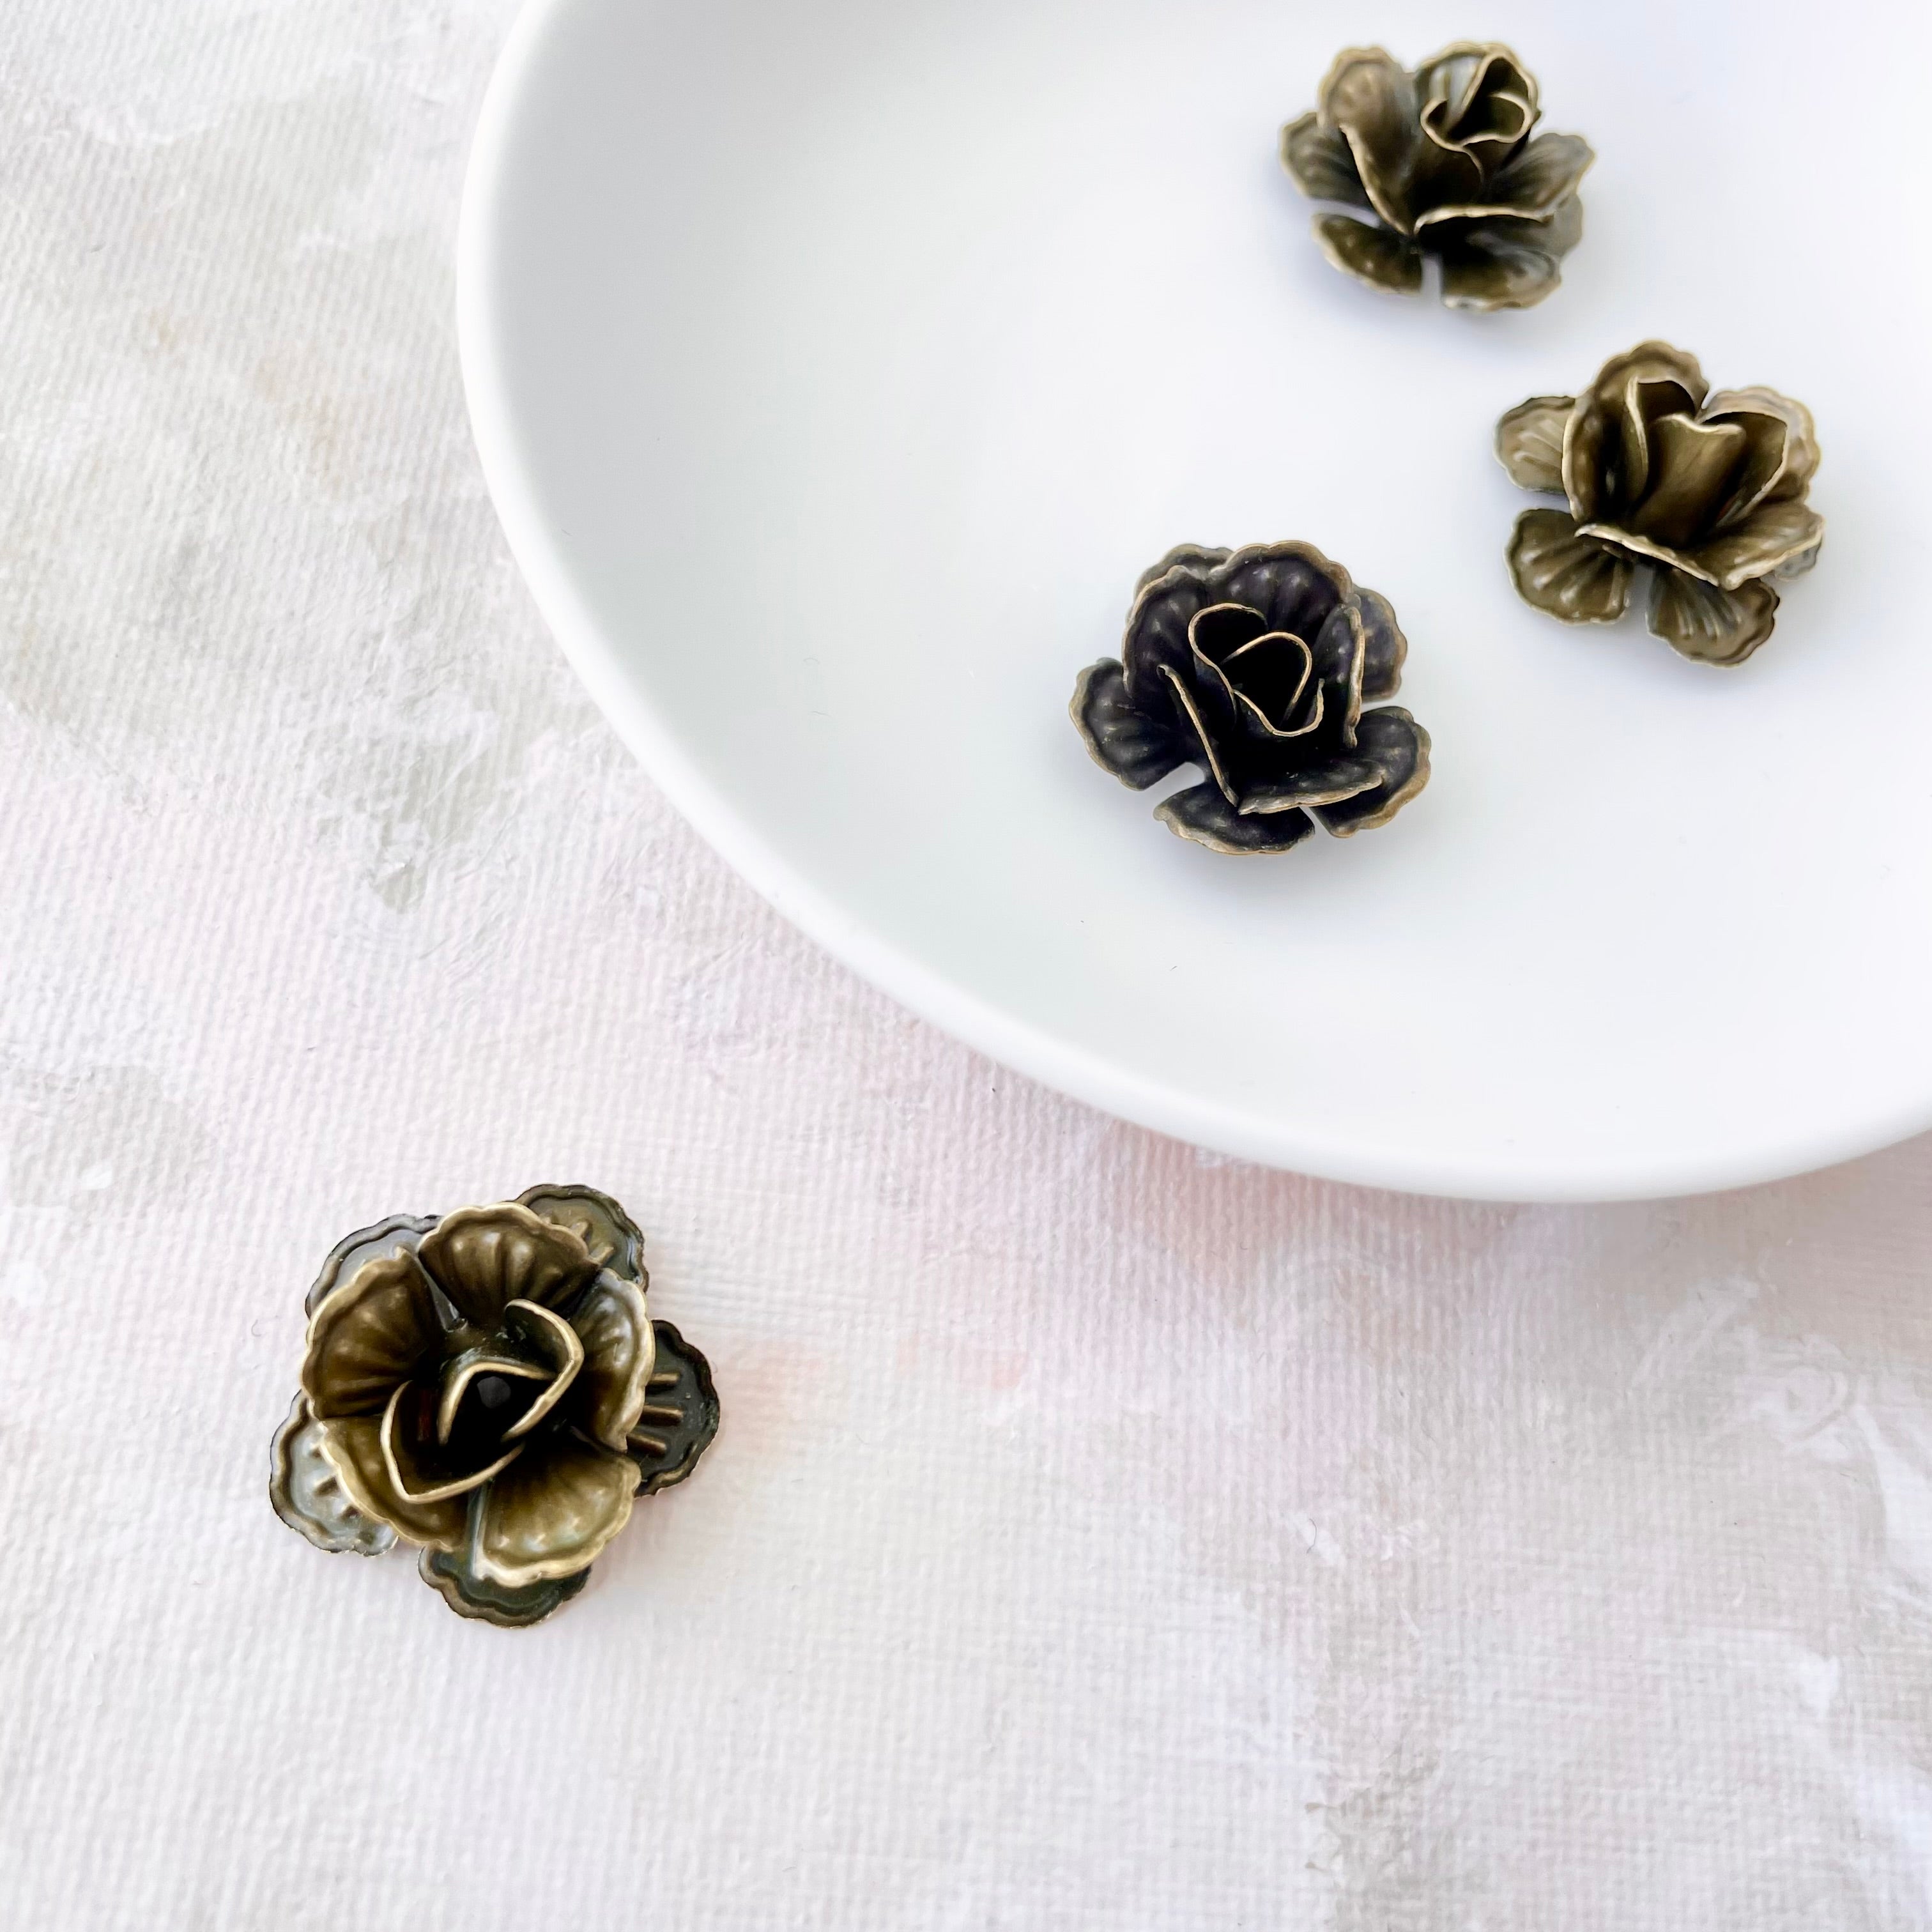 Close up of 4 small metal styling flowers  - Flat lay props from Champagne & GRIT